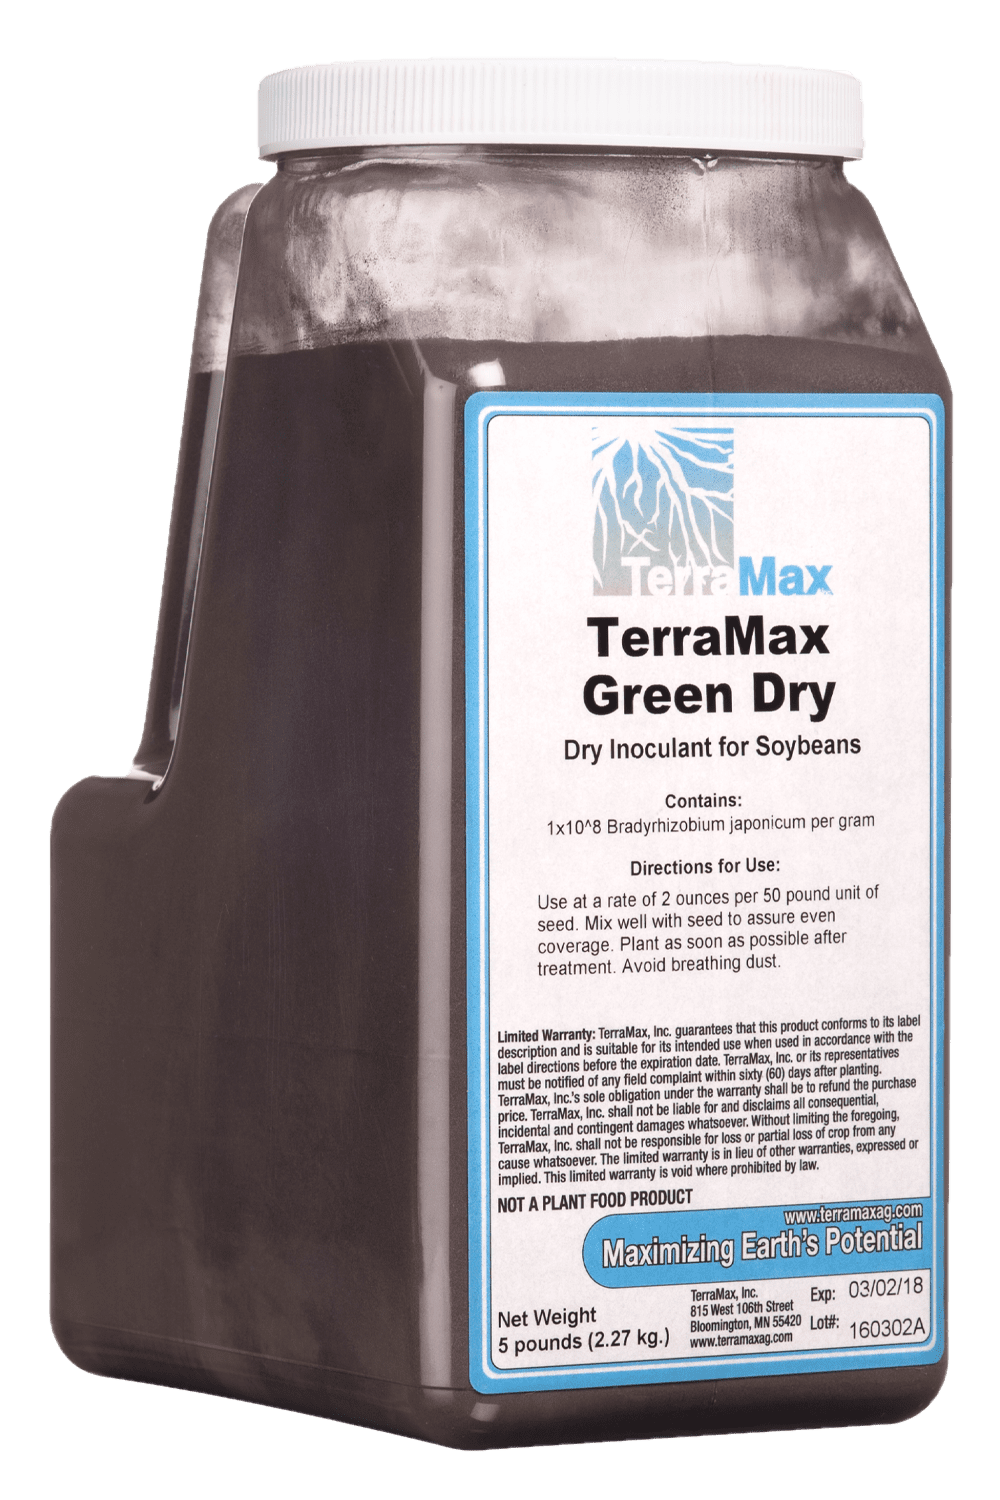 TerraMax Green Dry SI microbial inoculant for Soybeans.